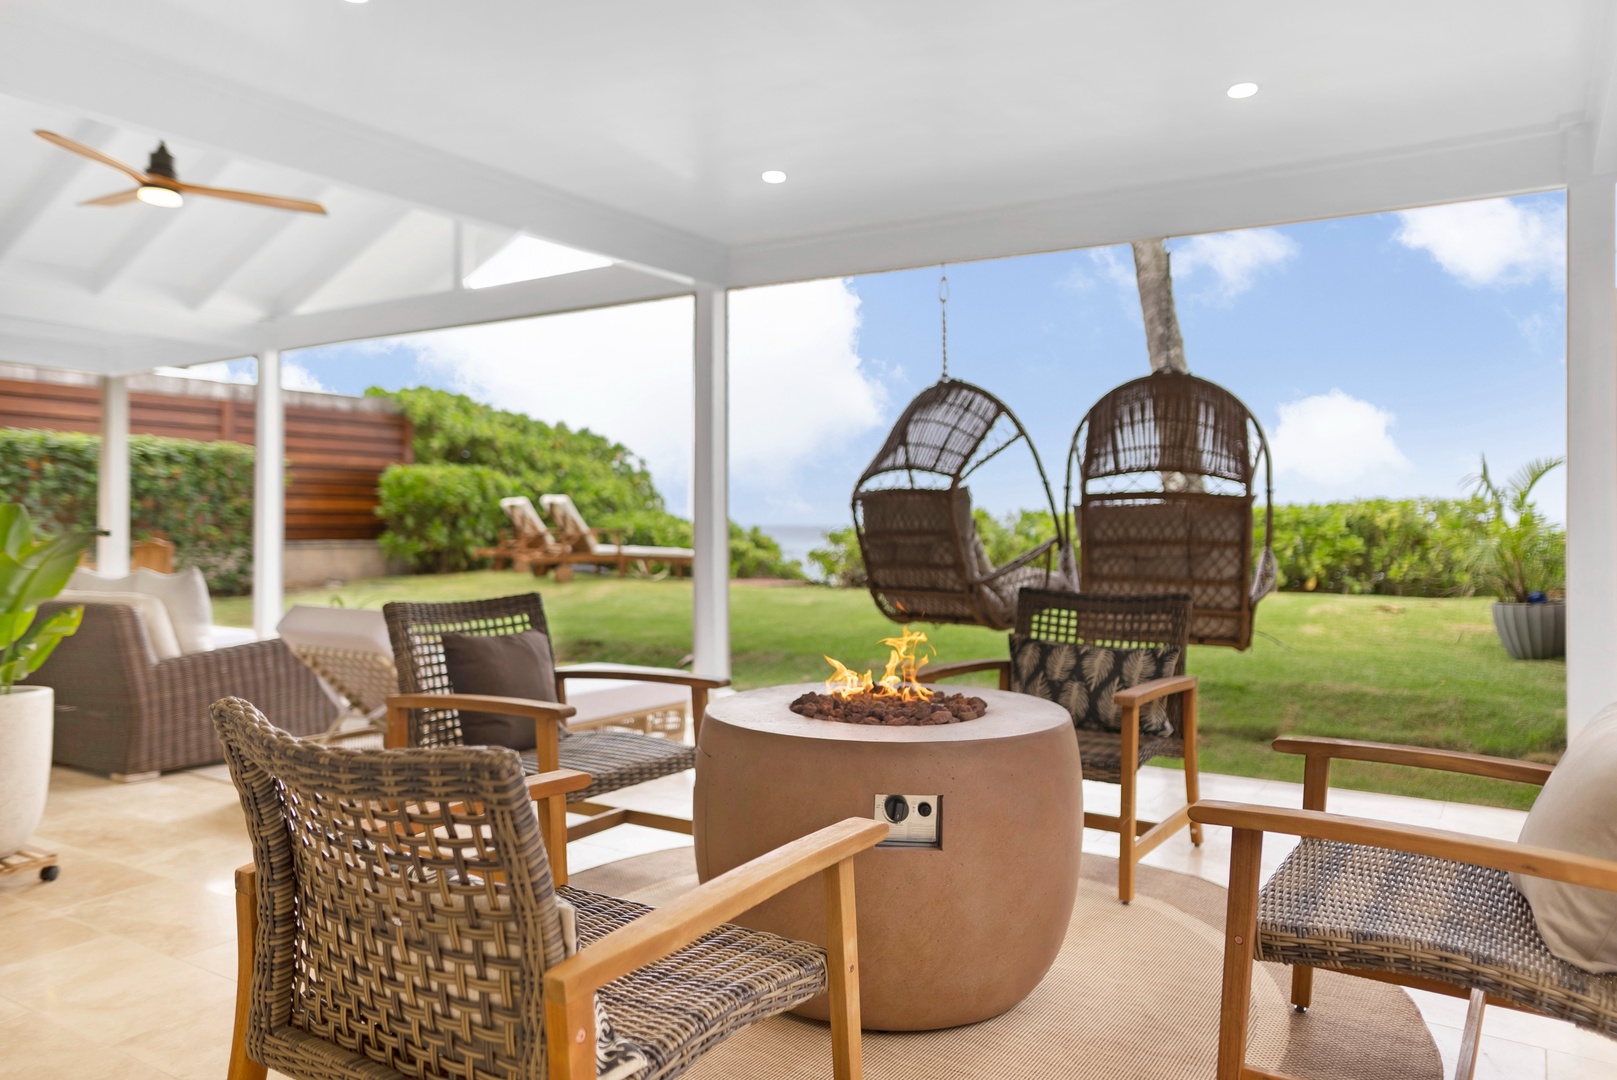 Haleiwa Vacation Rentals, Hale Nalu - Behold the unbeatable vistas of beach and ocean from Hale Nalu, offering you a front-row seat to paradise's spectacle.